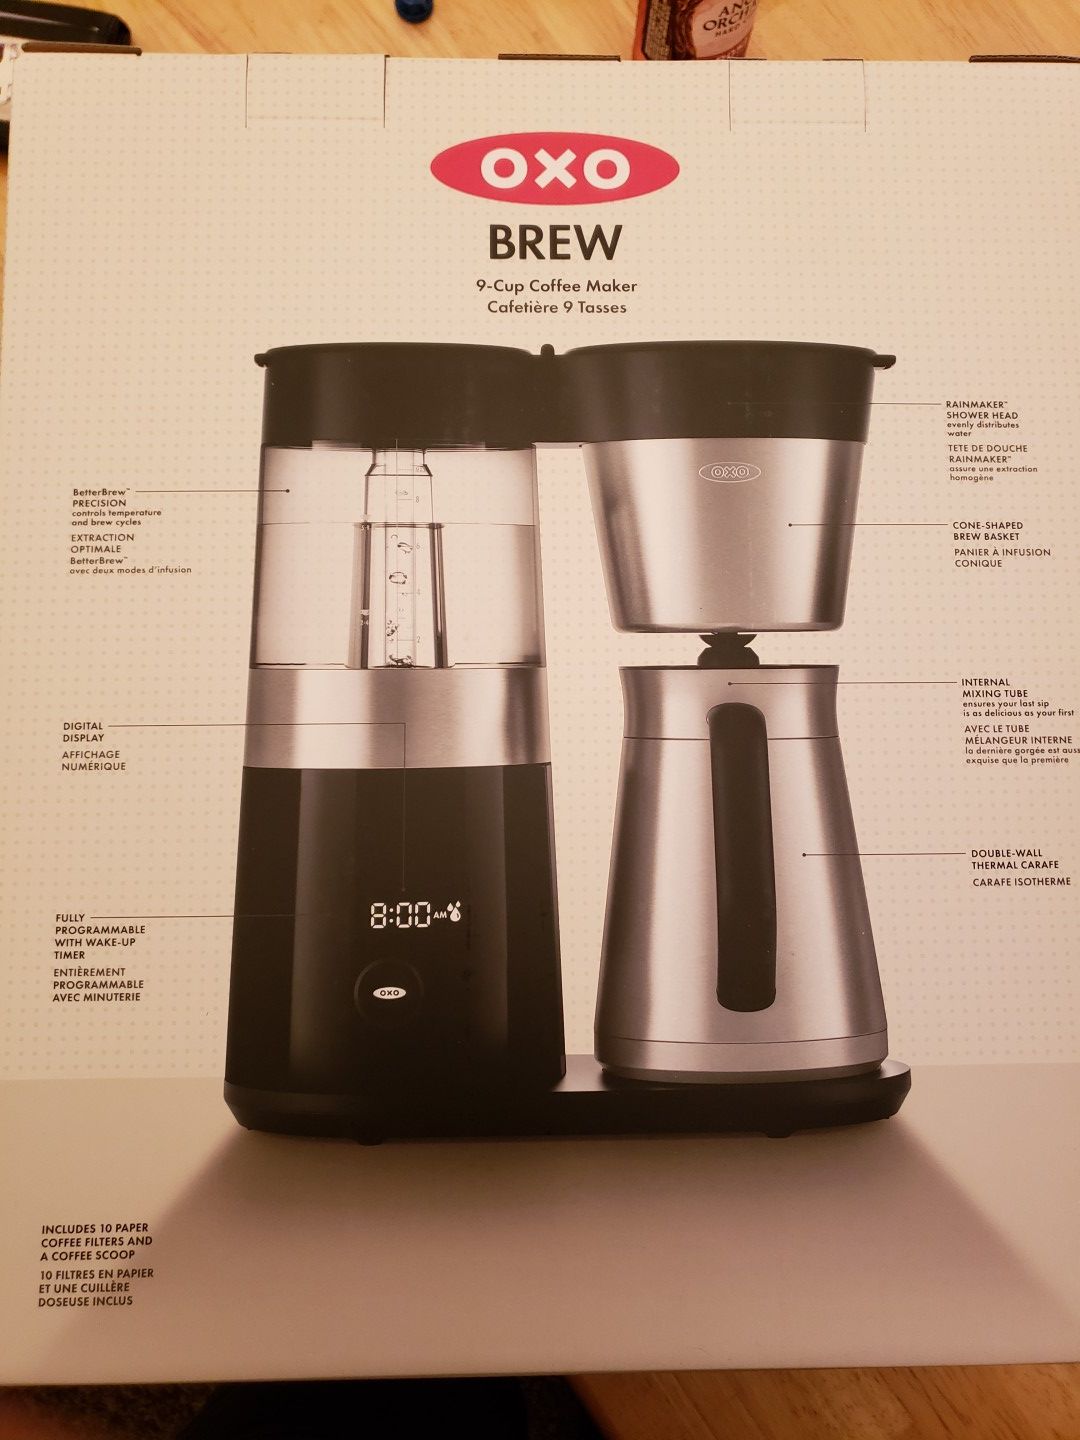 OXO Brew 9 cup coffee maker model #8710100